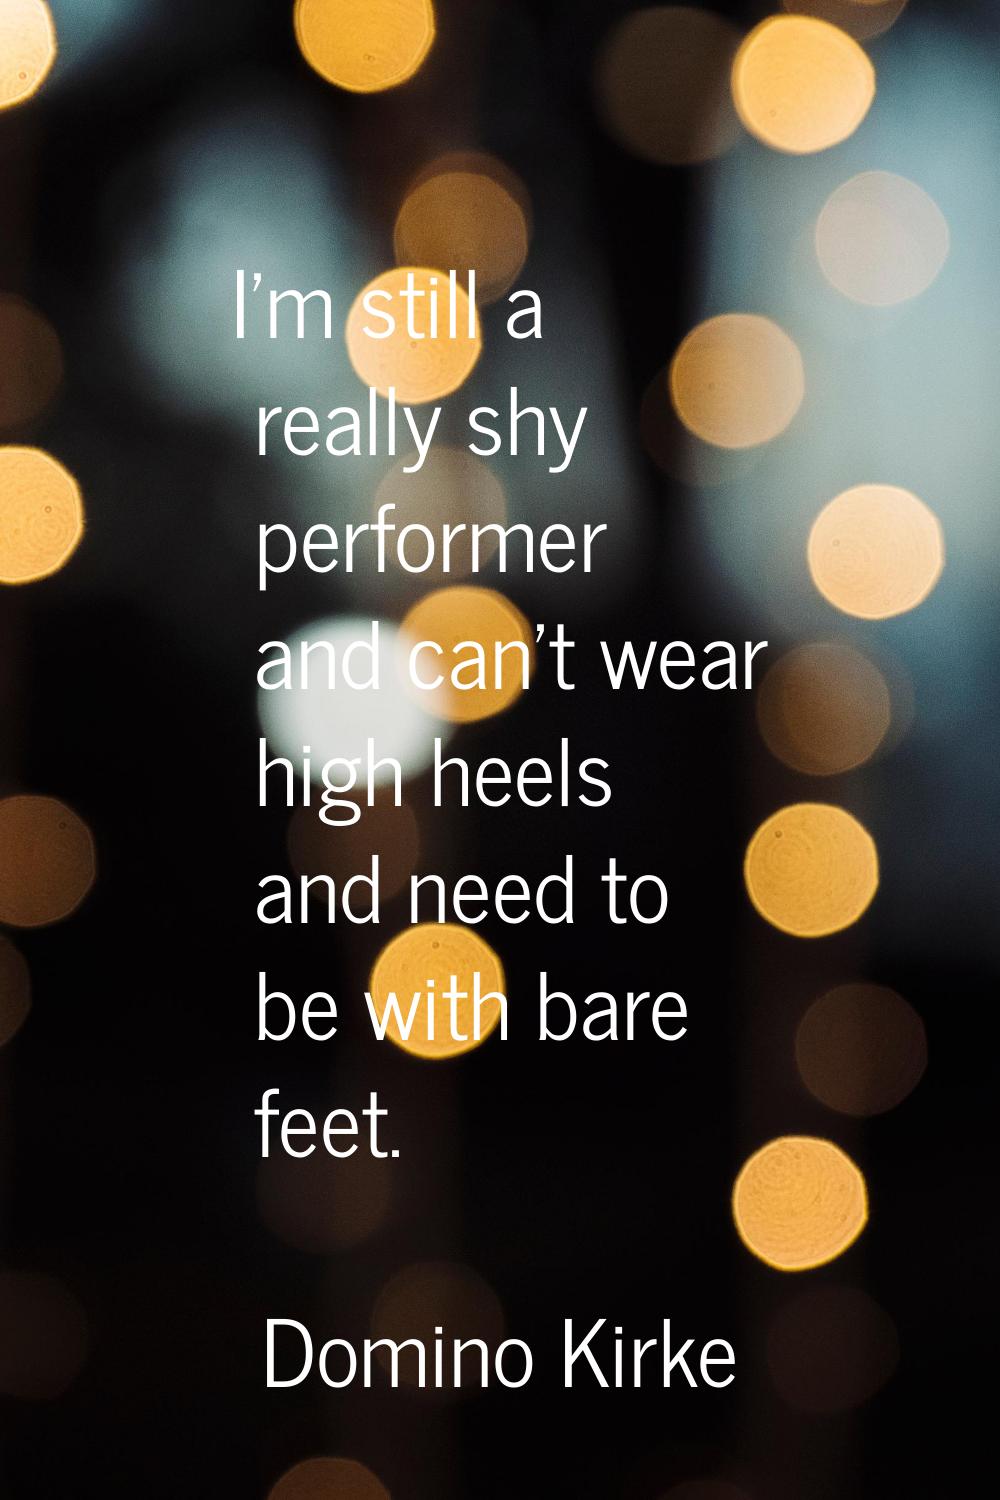 I'm still a really shy performer and can't wear high heels and need to be with bare feet.